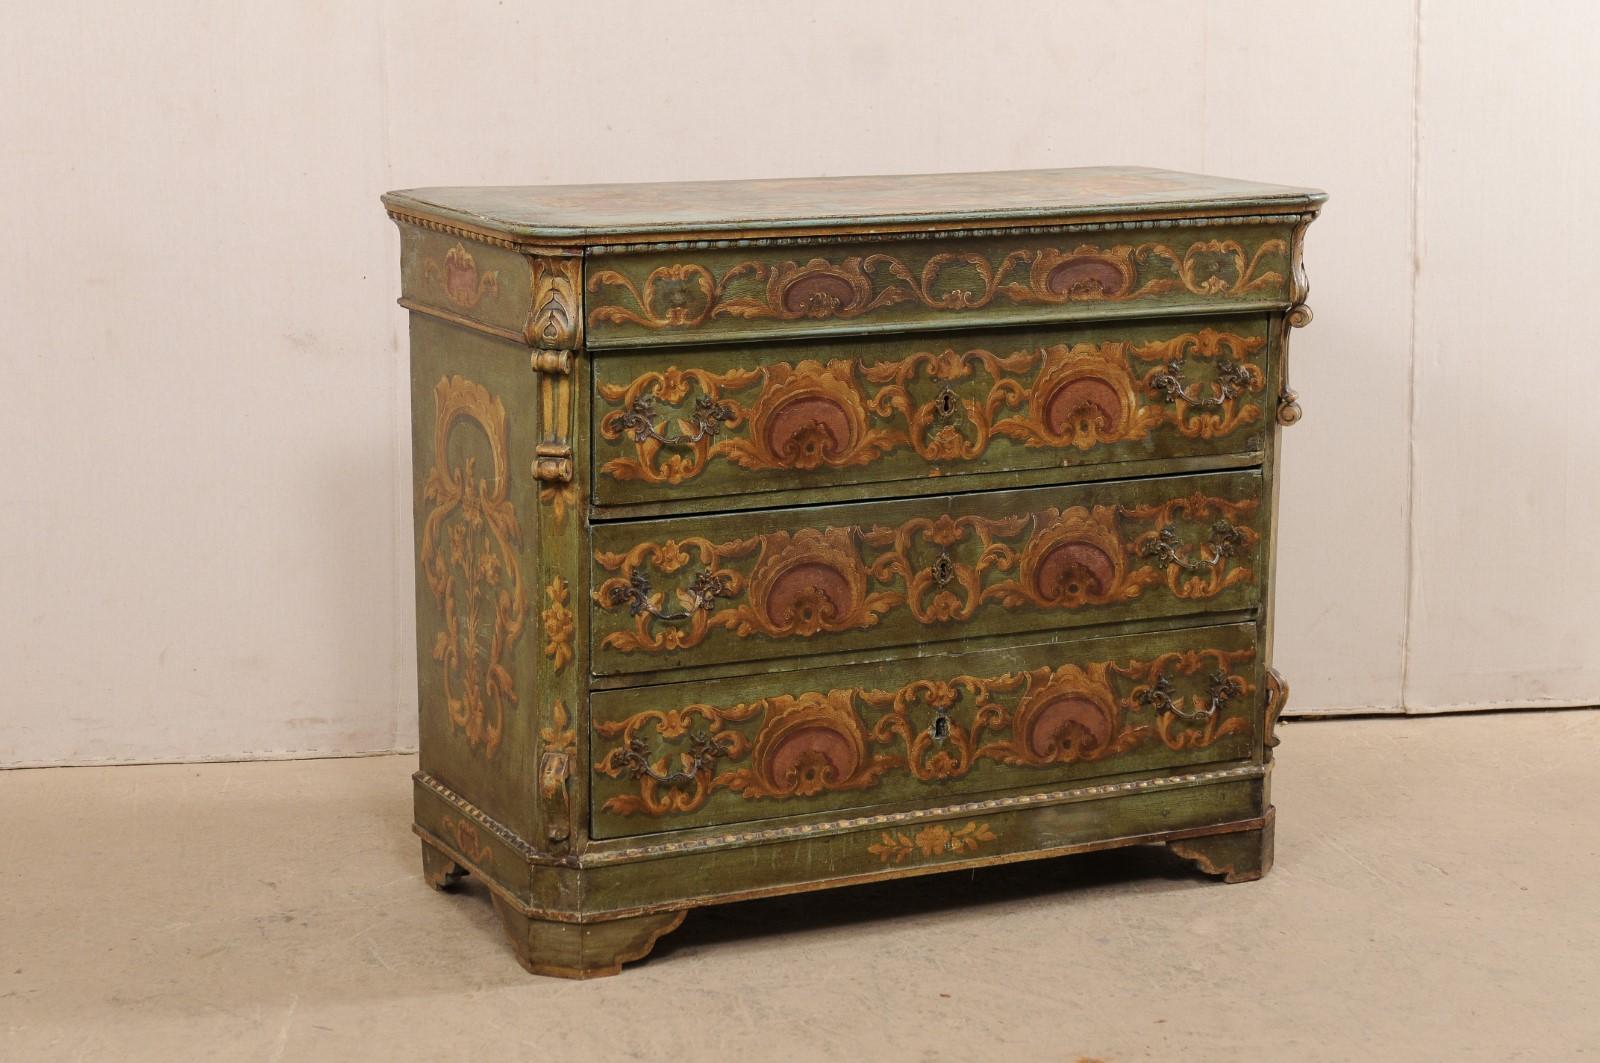 A Central European chest, with its original decorative paint, from the 19th century. This antique chest of drawers from Europe is beautifully adorned in its original hand painted artisan finish in a rinceaux of elegant scrolling acanthus leaves and